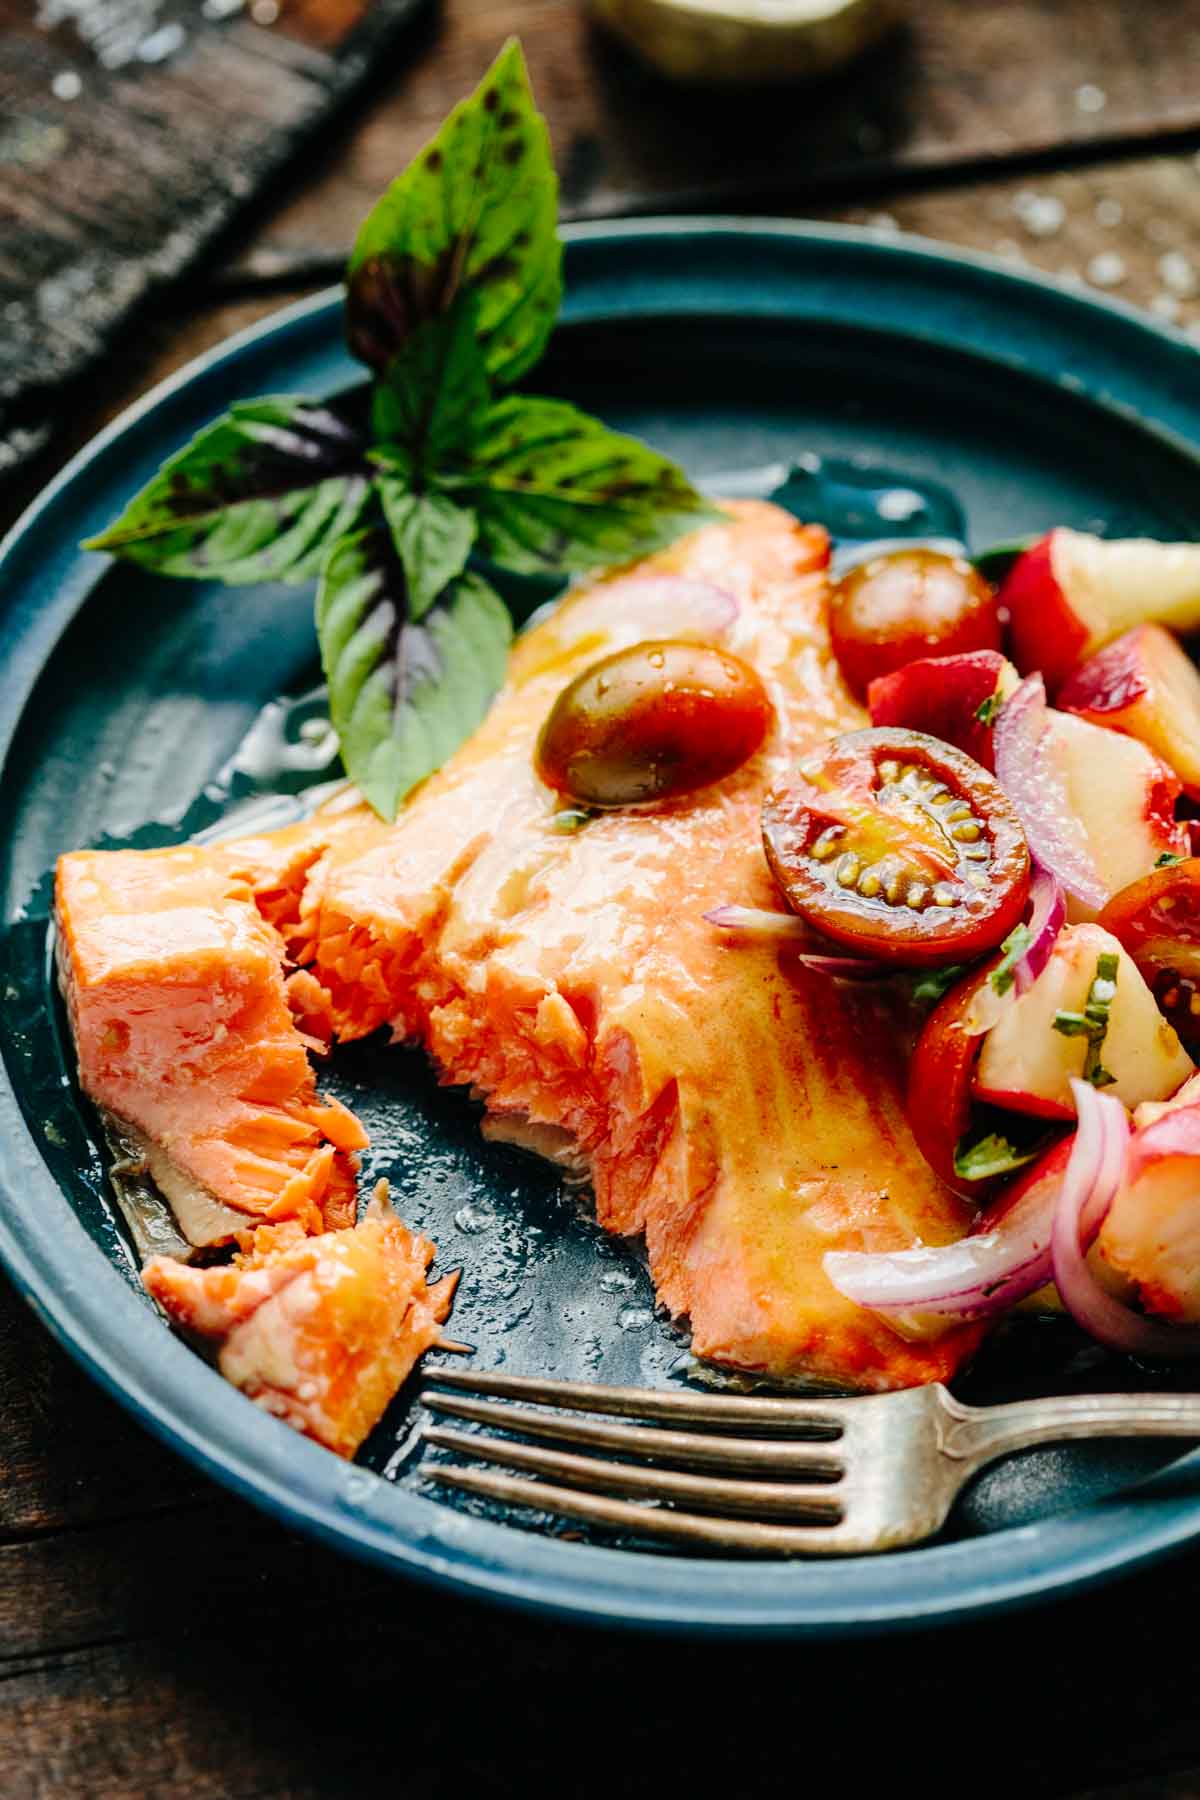 Roasted salmon on a plate with tomatoes and a bite taken out of it.